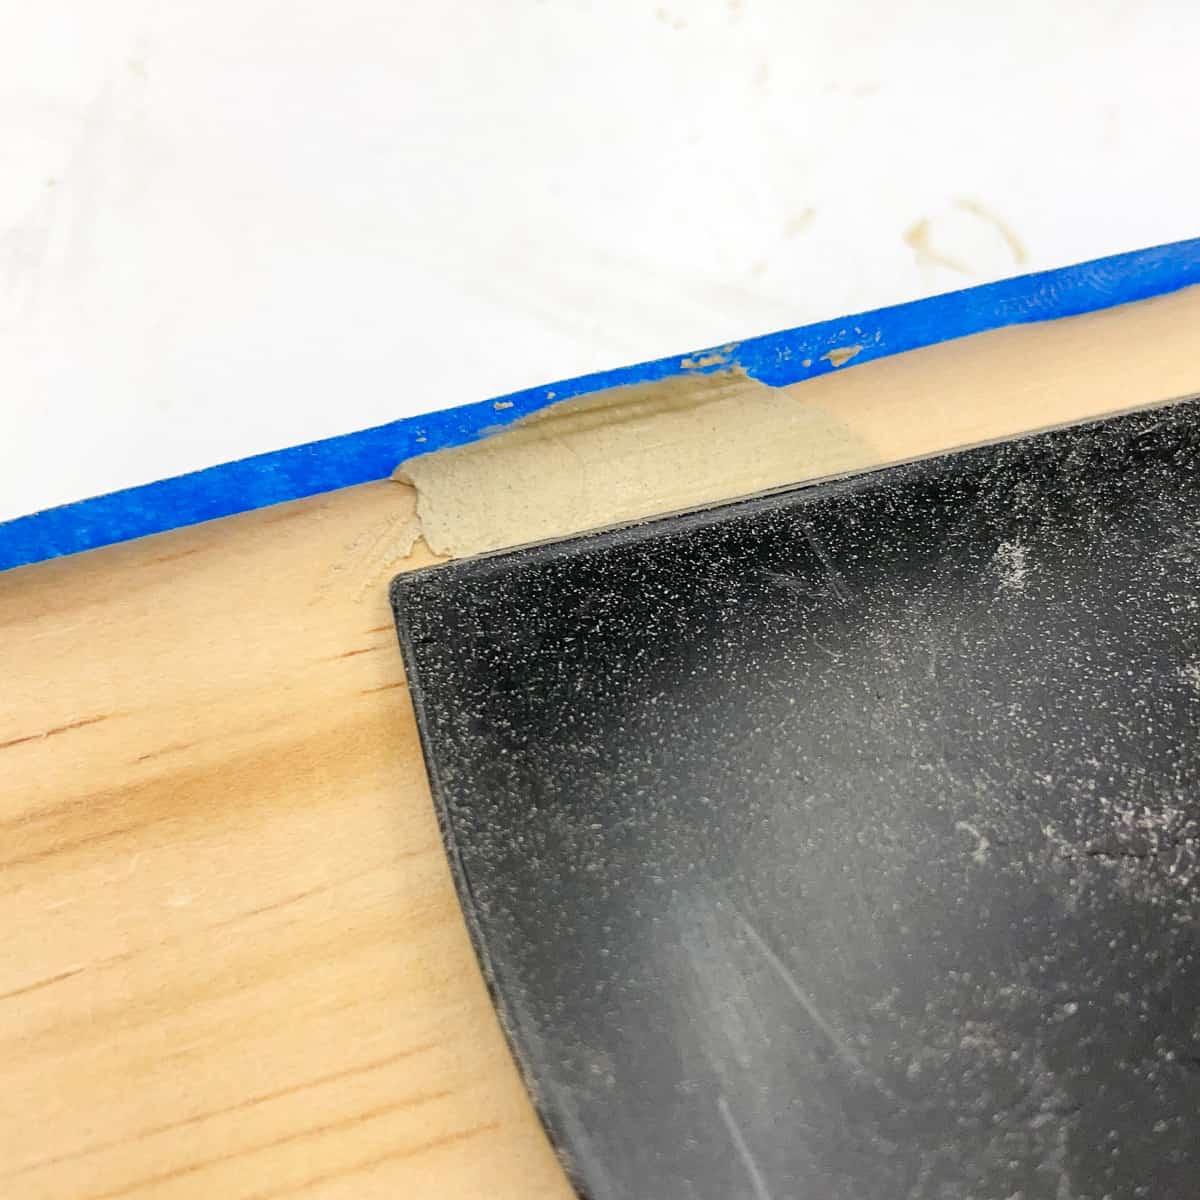 creating a wood filler dam with painter's tape to repair dented corner of wood board